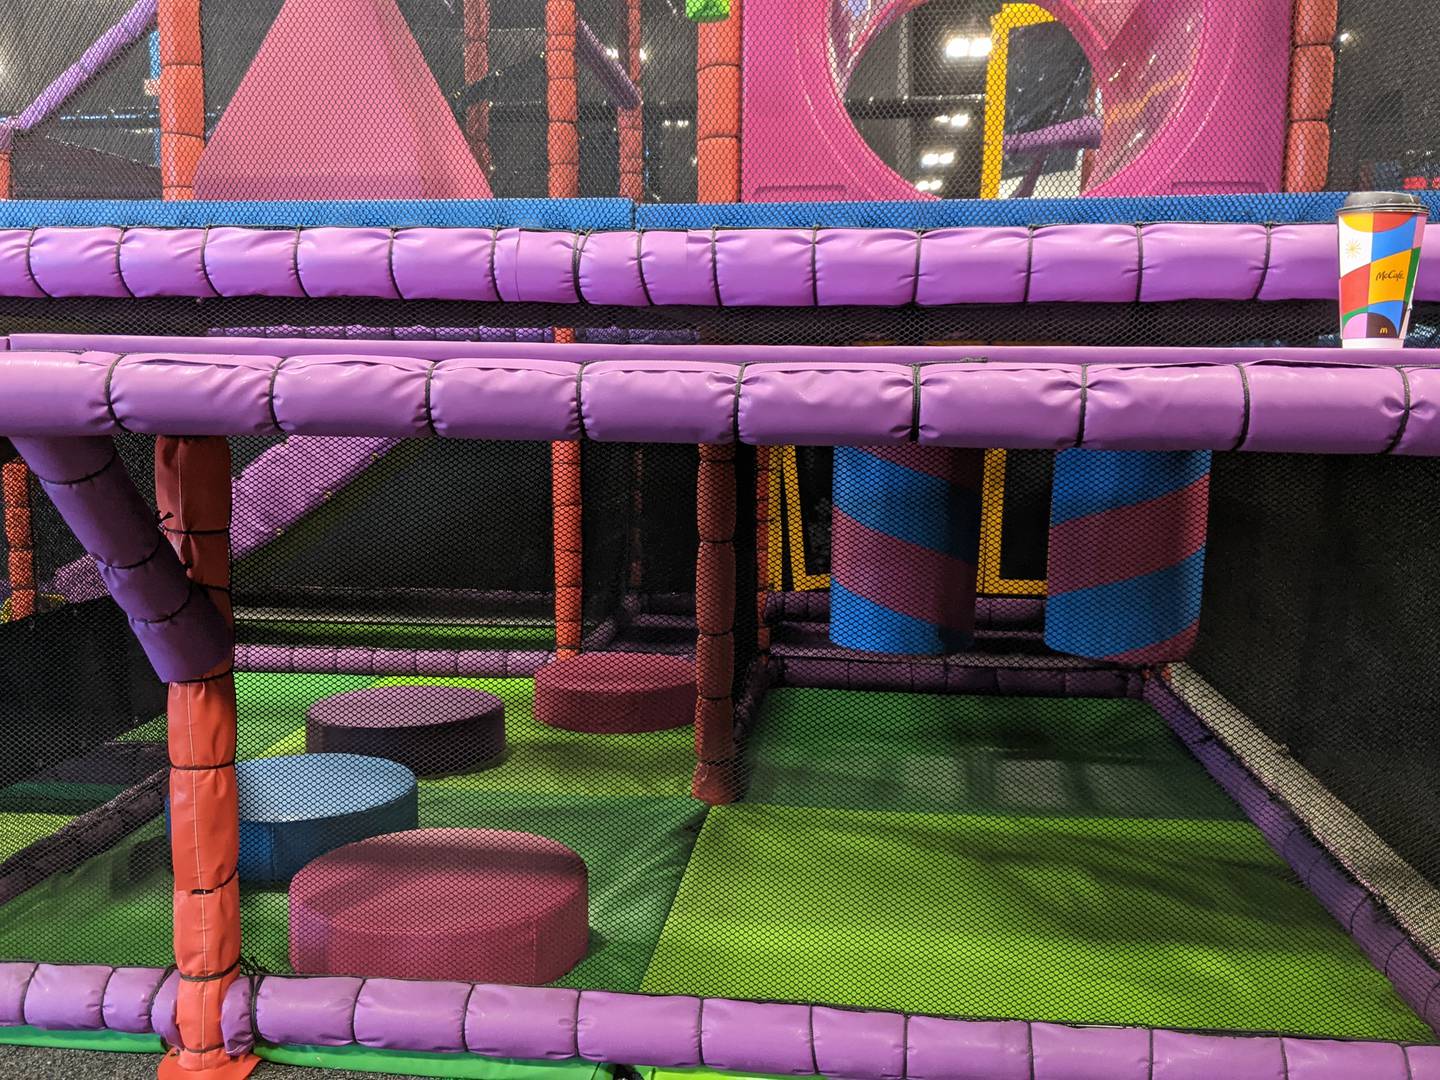 One of the new attractions at the Altitude Trampoline Park in Oswego.